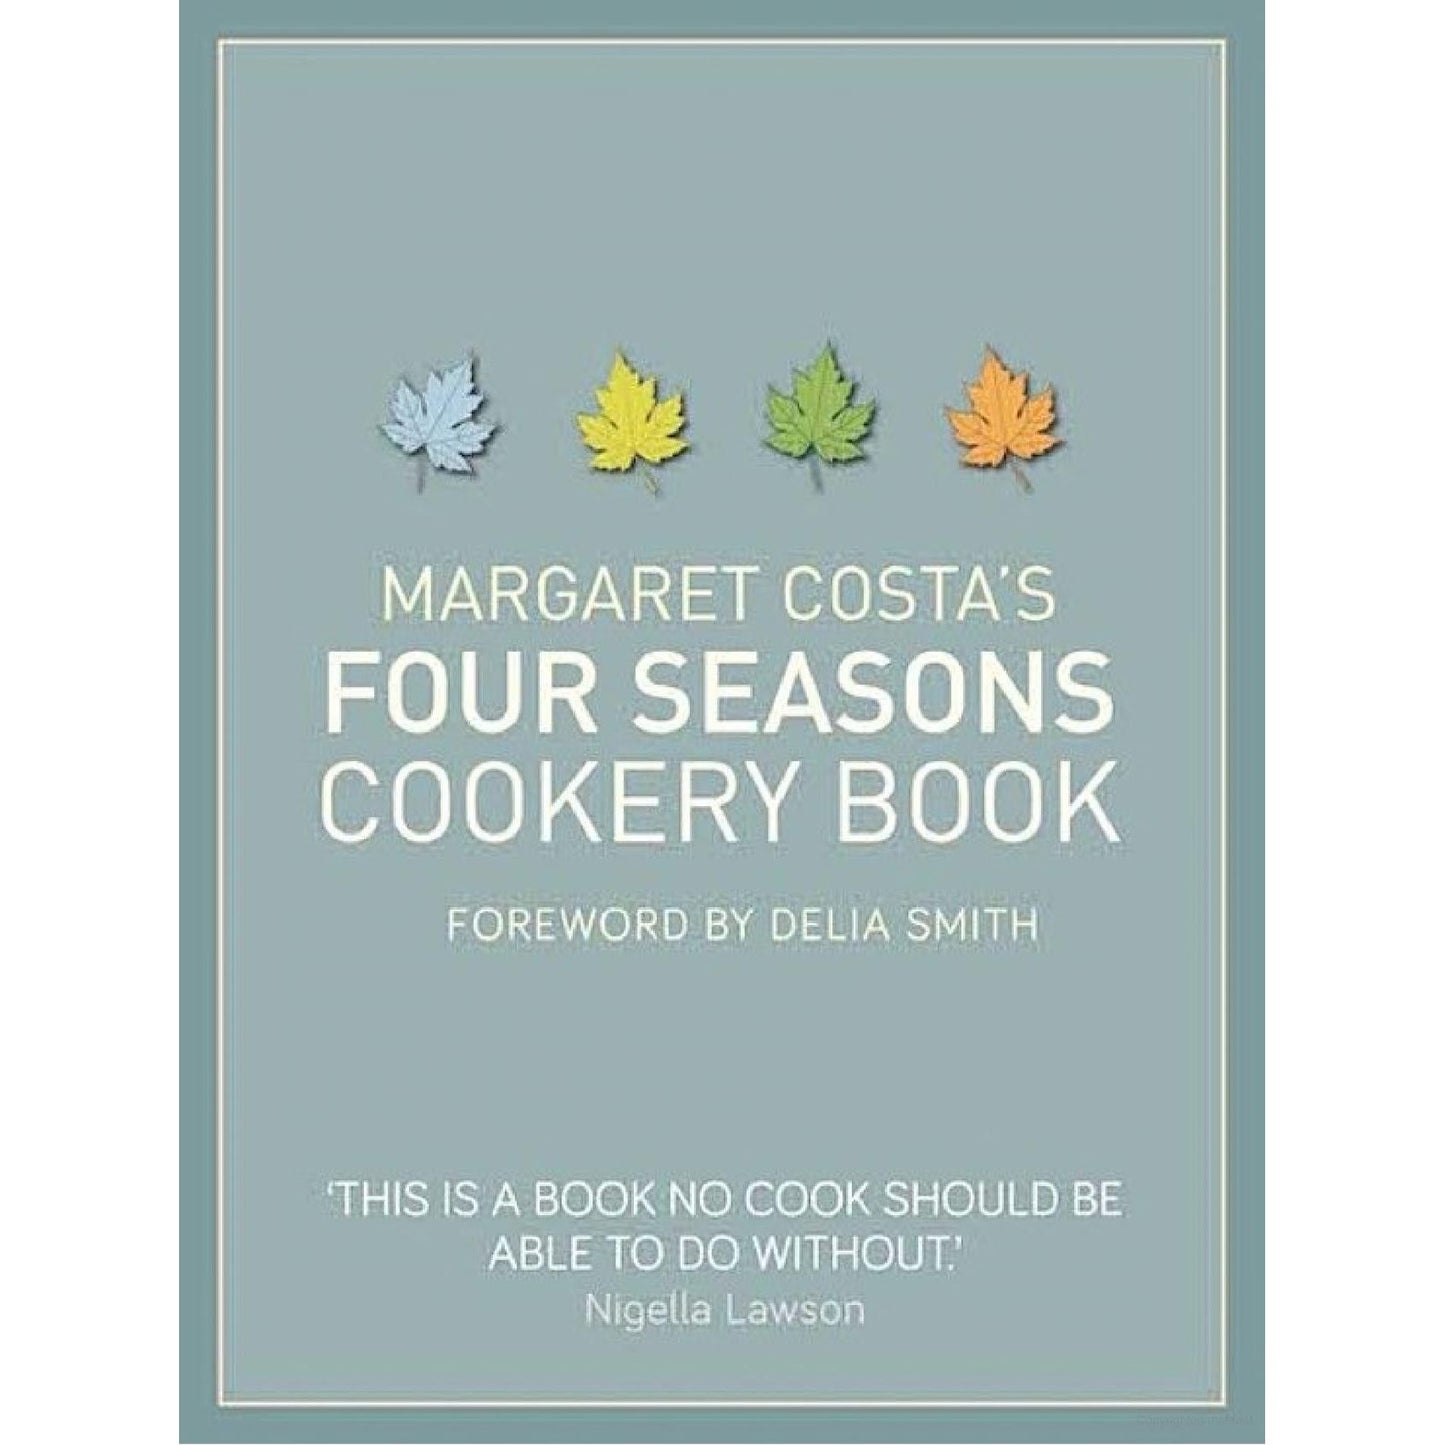 Four Seasons Cookery Book (Margaret Costa)